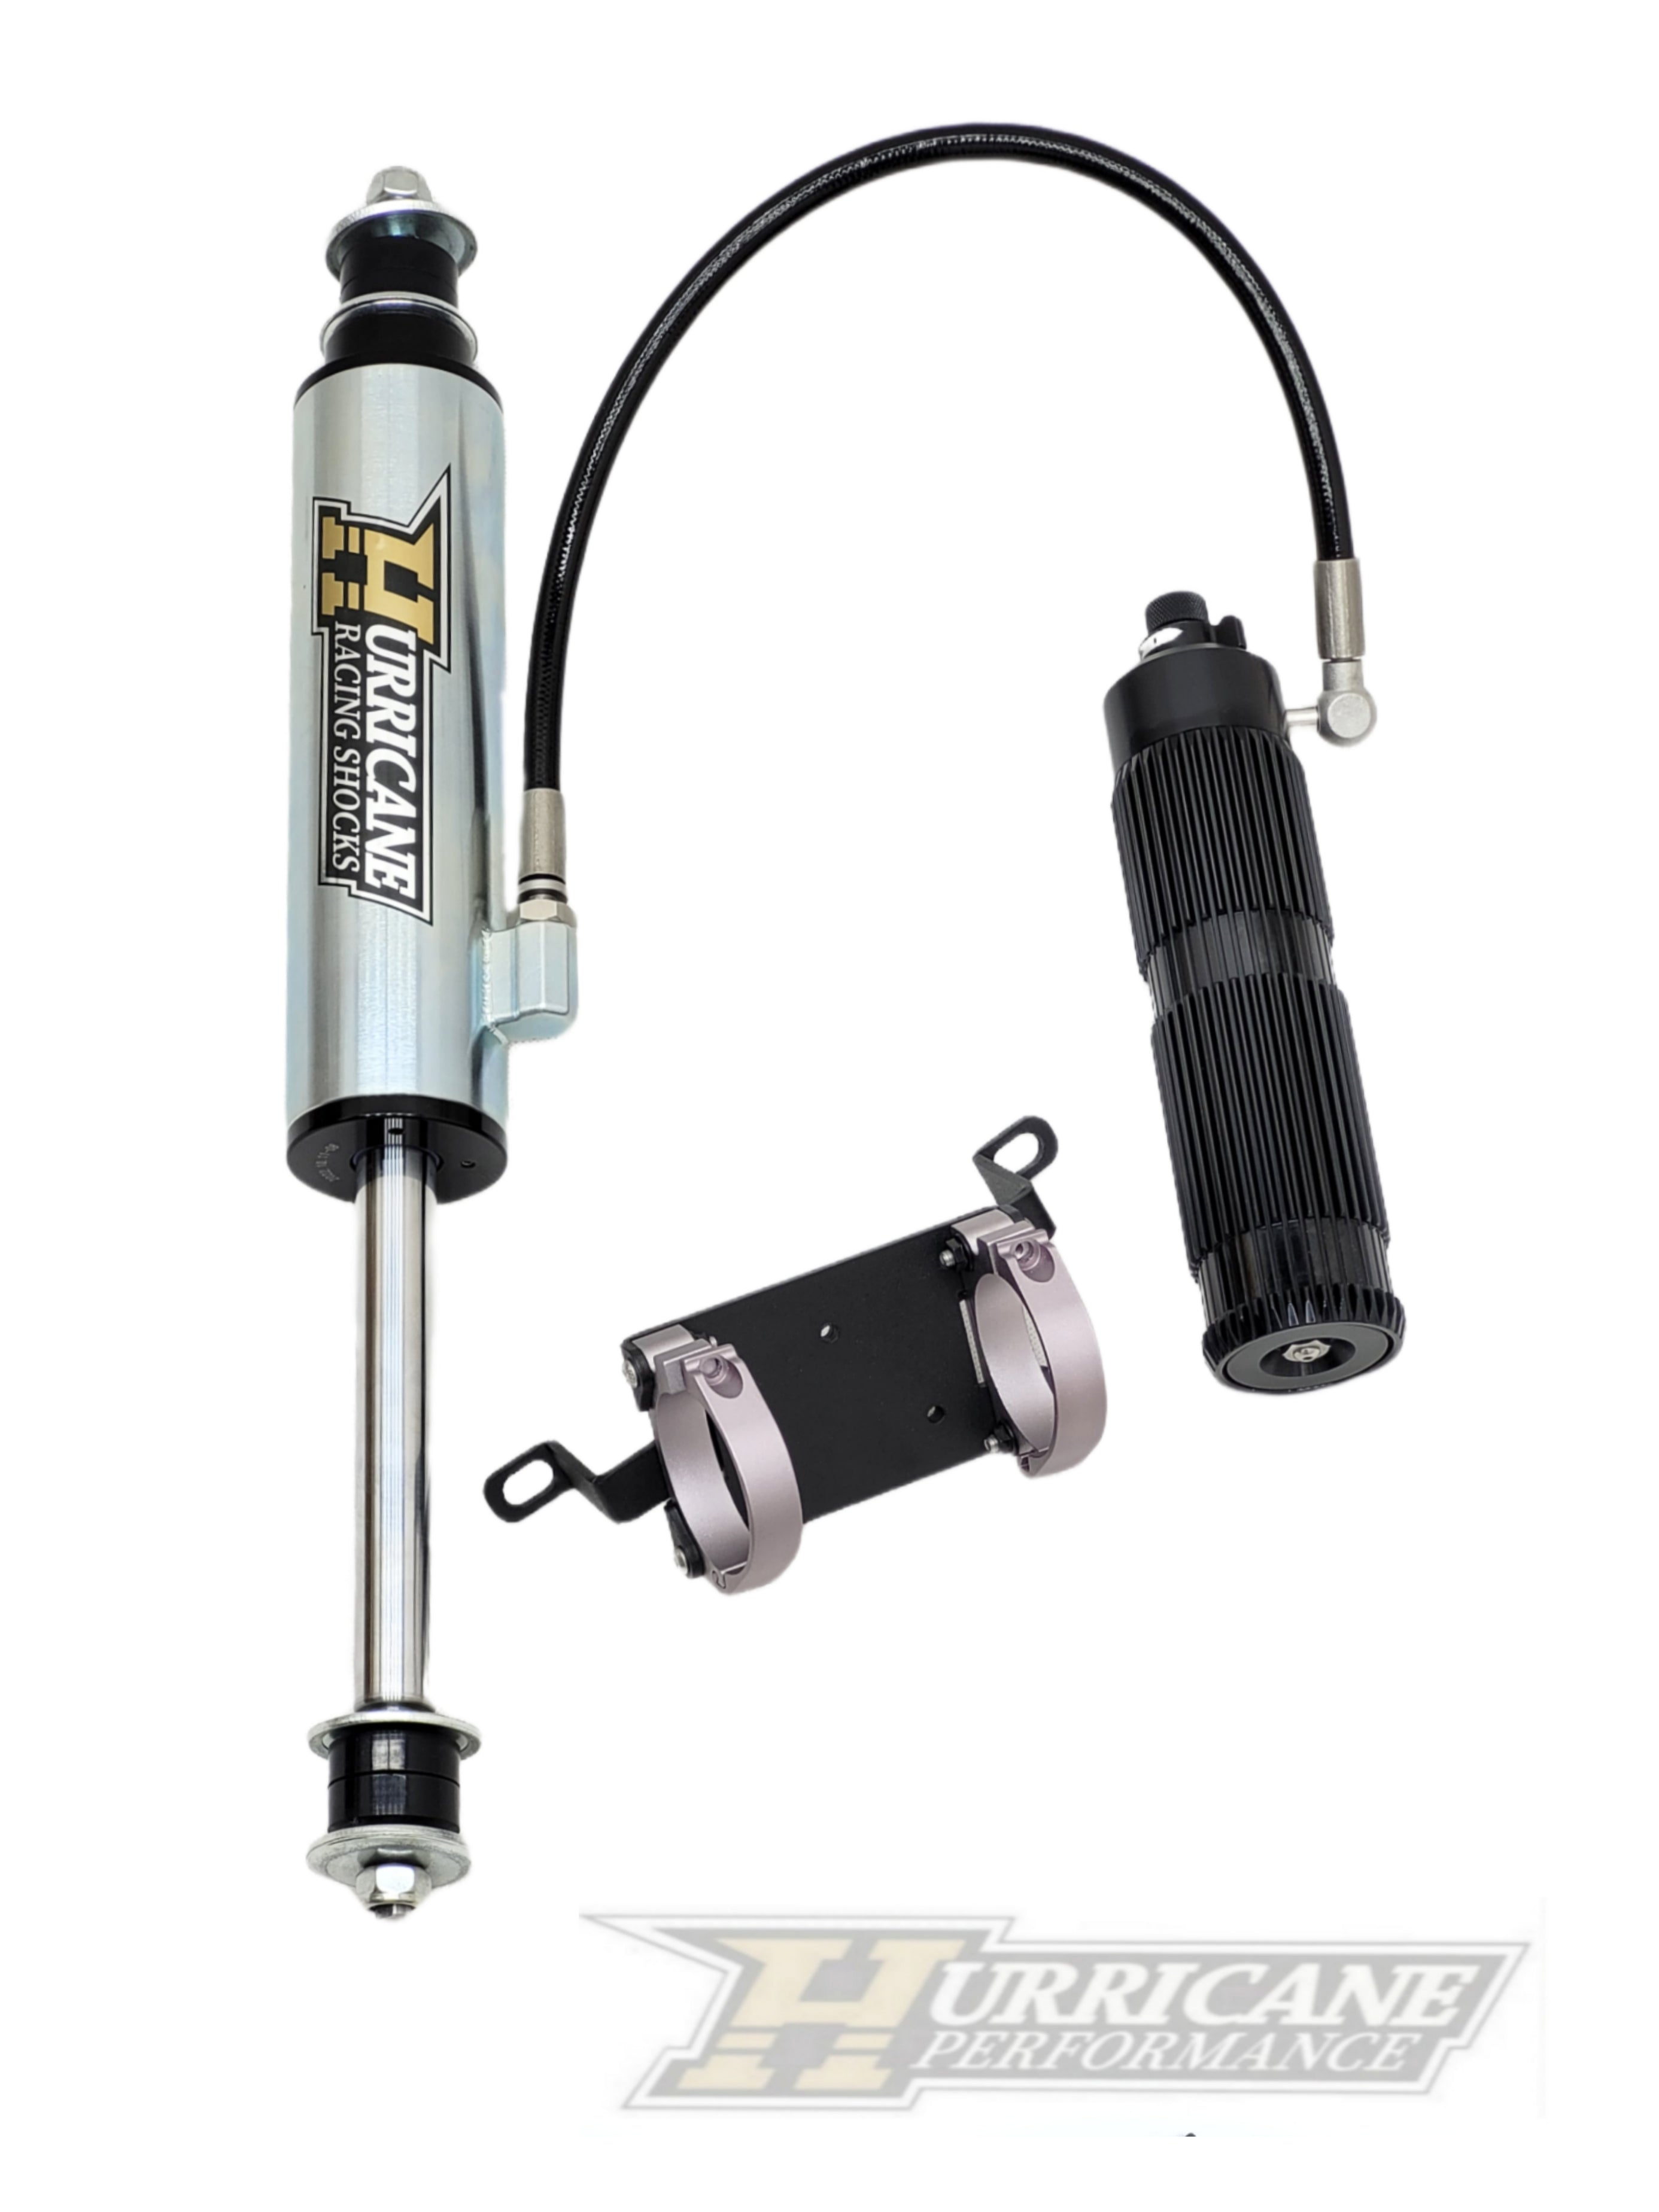 Hurricane Performance Extreme Series Shocks 3" Front & 2.5" Rear, With Reservoir, Double Adjuster, for Nissan Patrol Y61